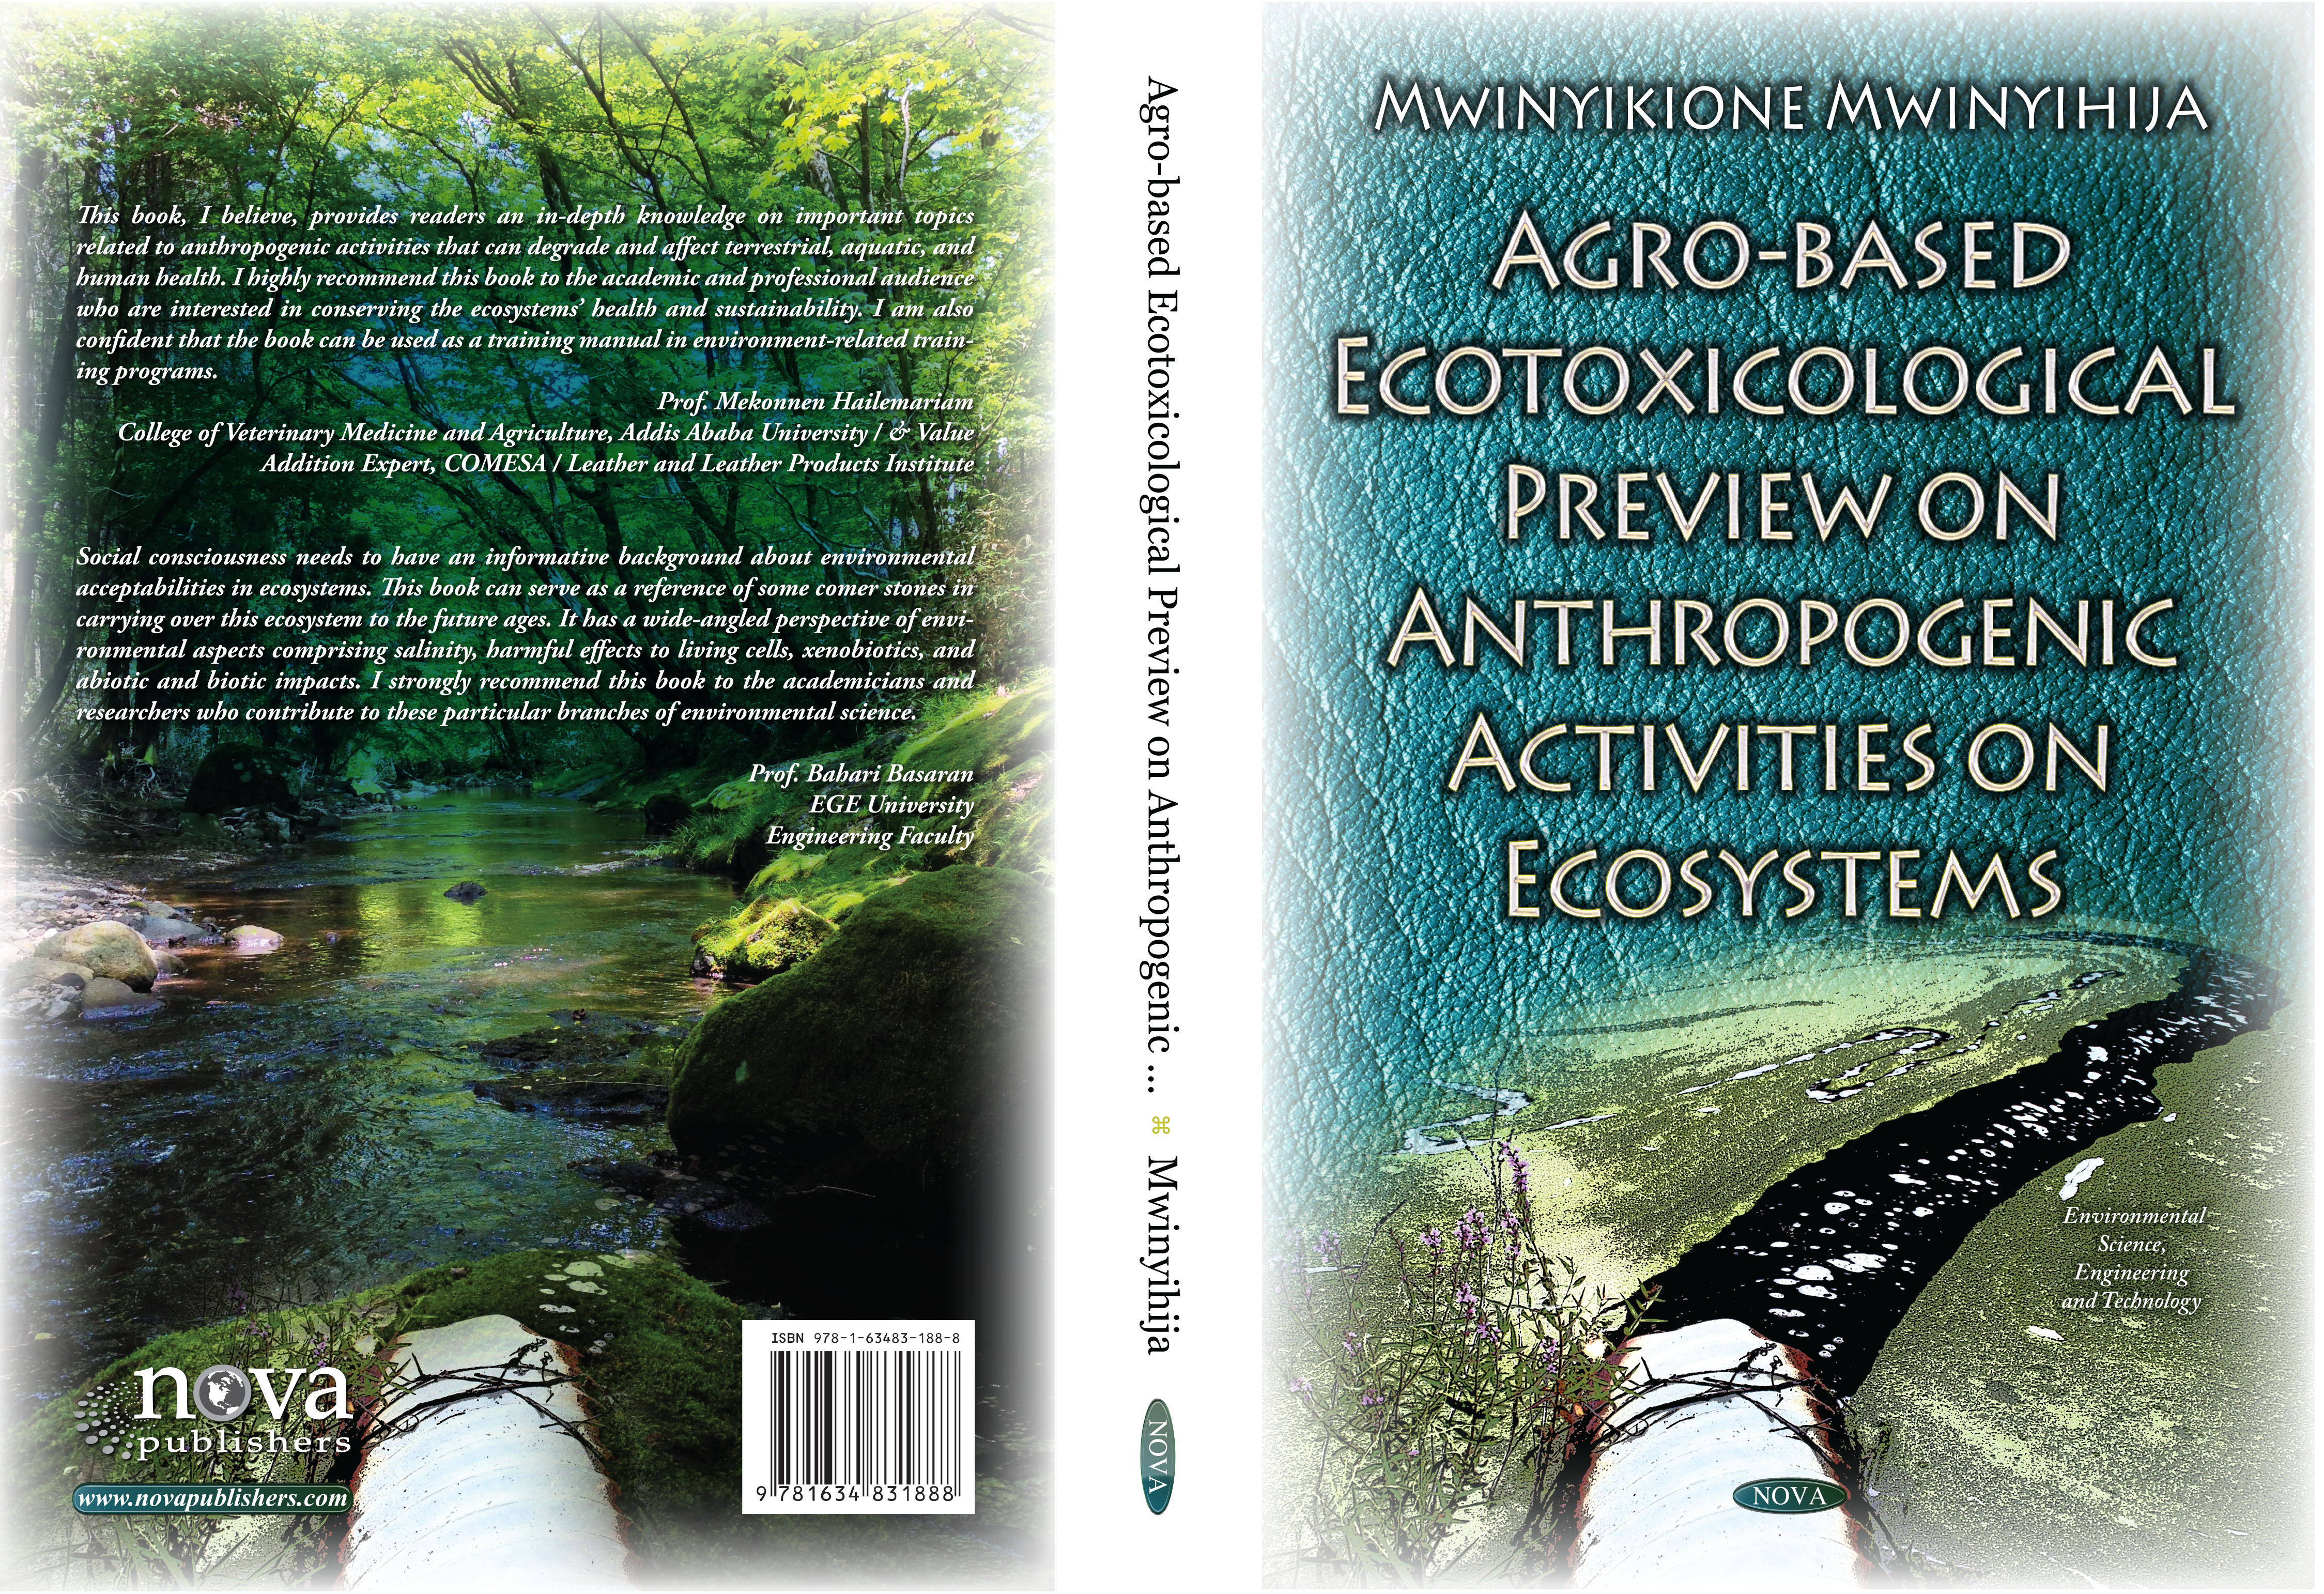 Agro-based Ecotoxicological Preview on Anthropogenic Activities on Ecosystems